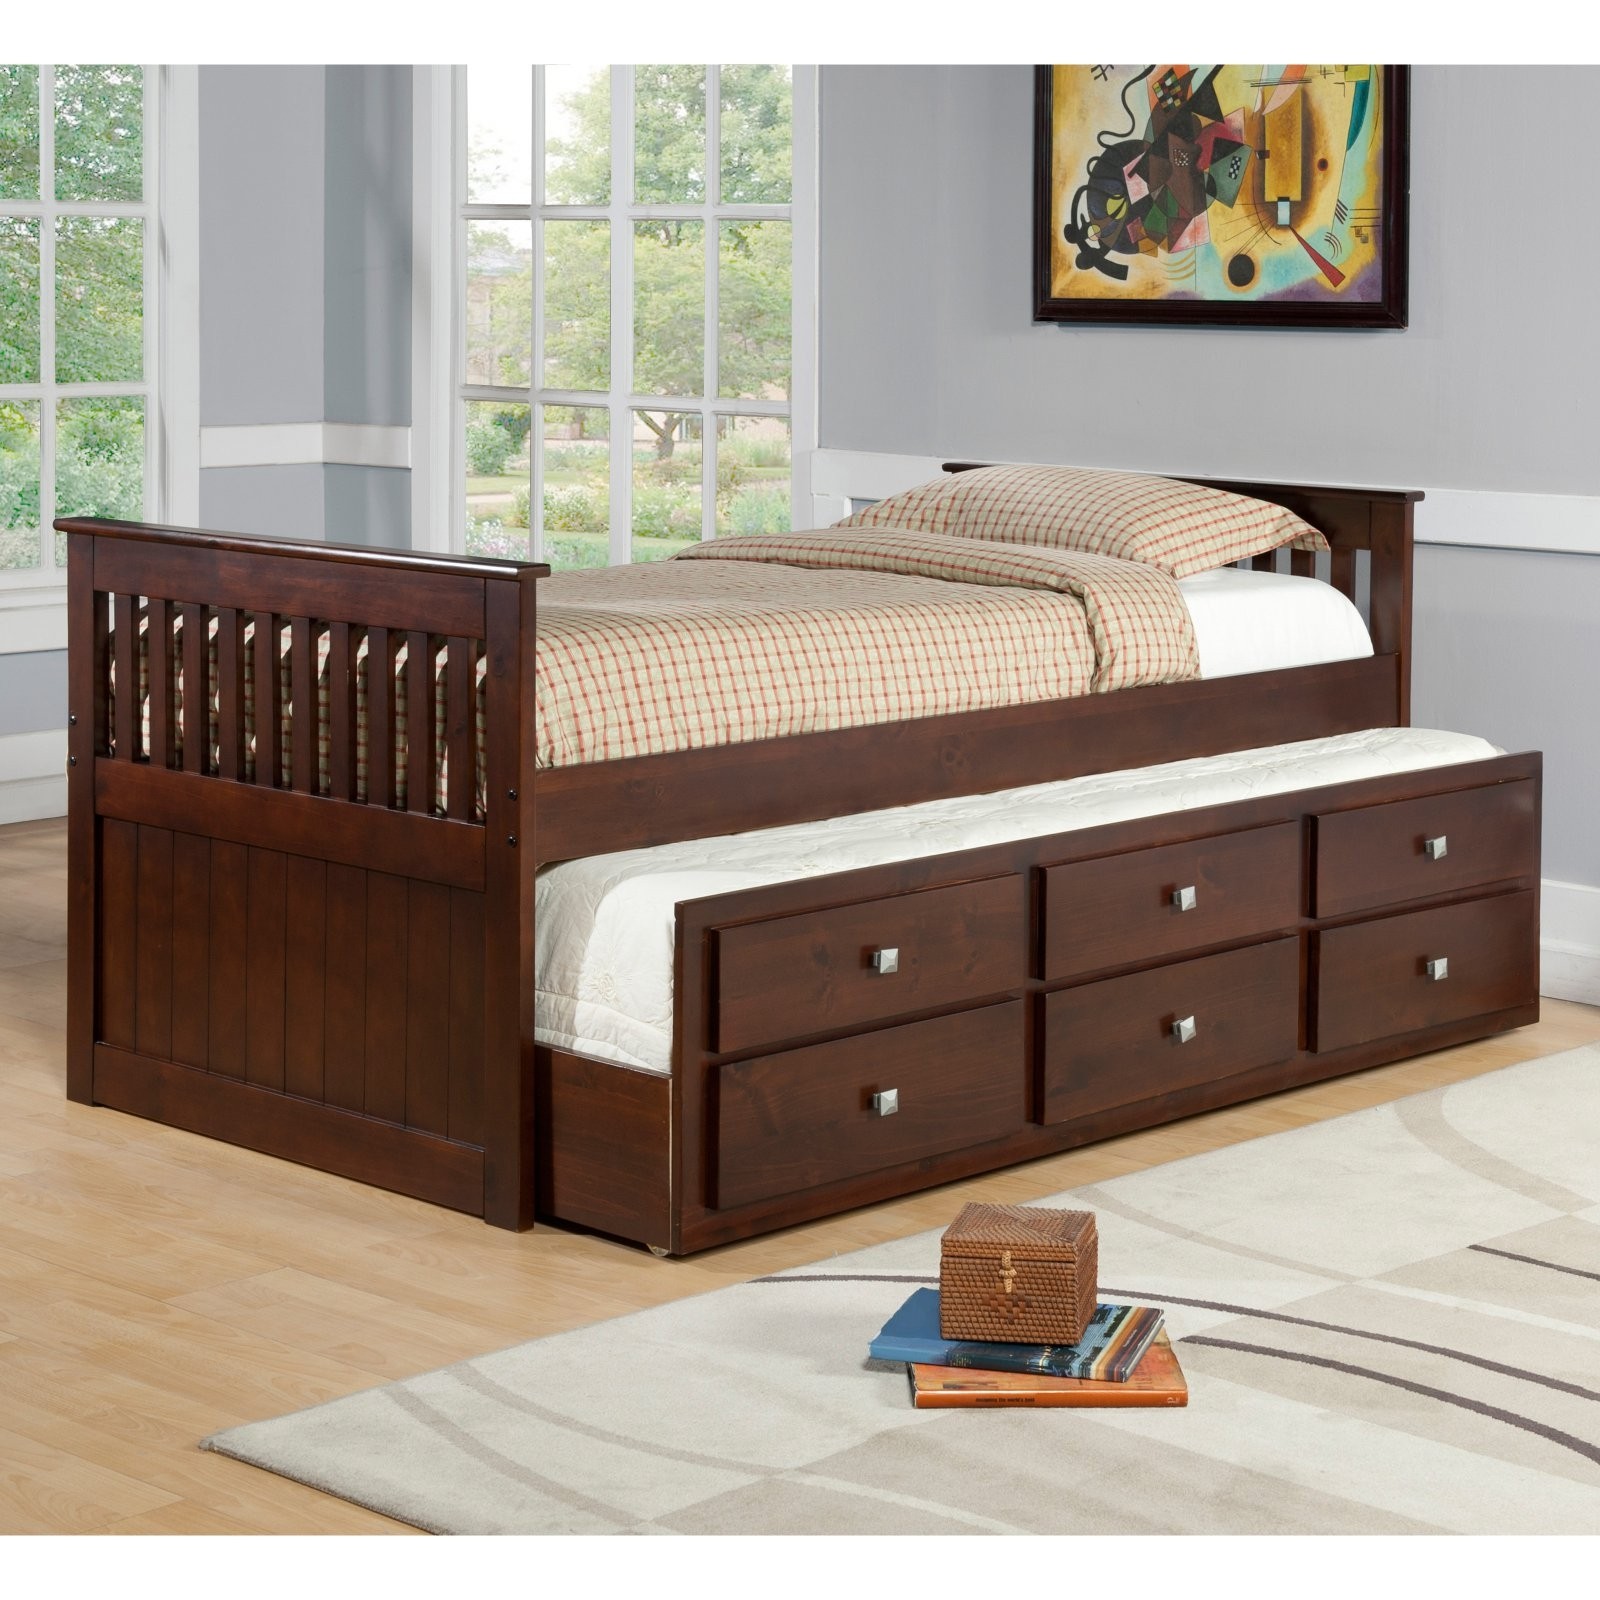 Donco kids captains twin trundle bed